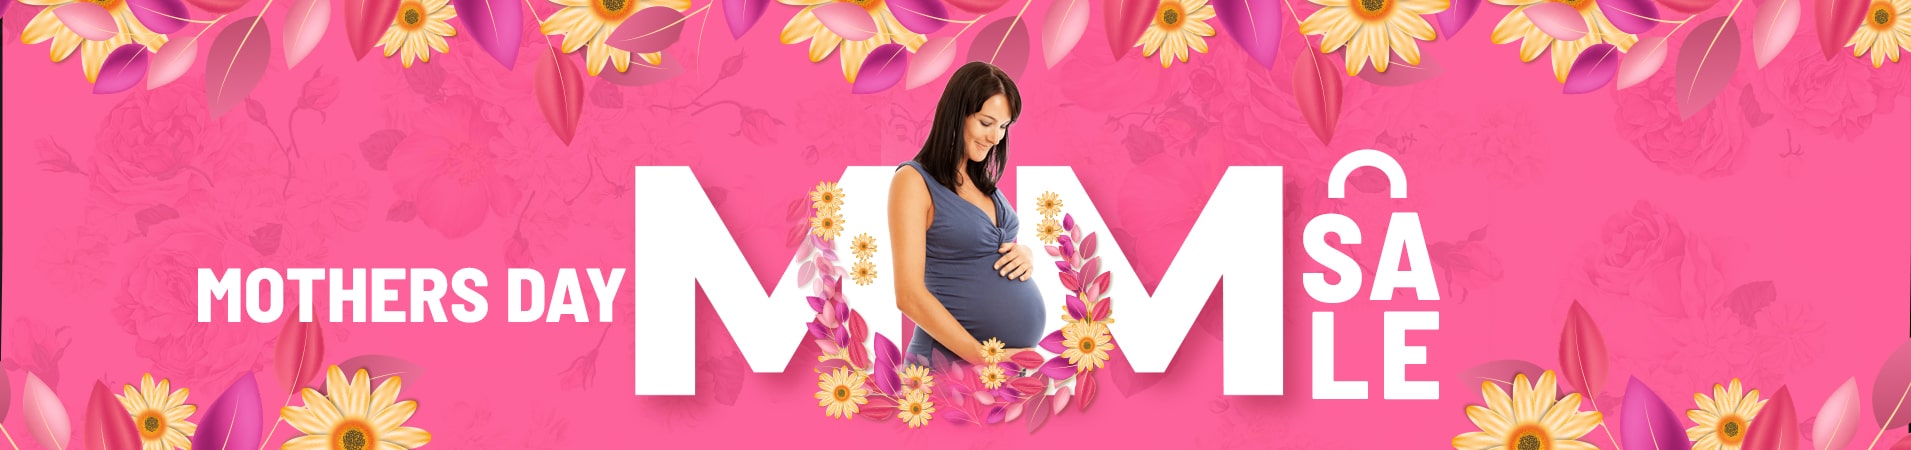 Mothers Day Sale Block Image Freedomcoupons.com